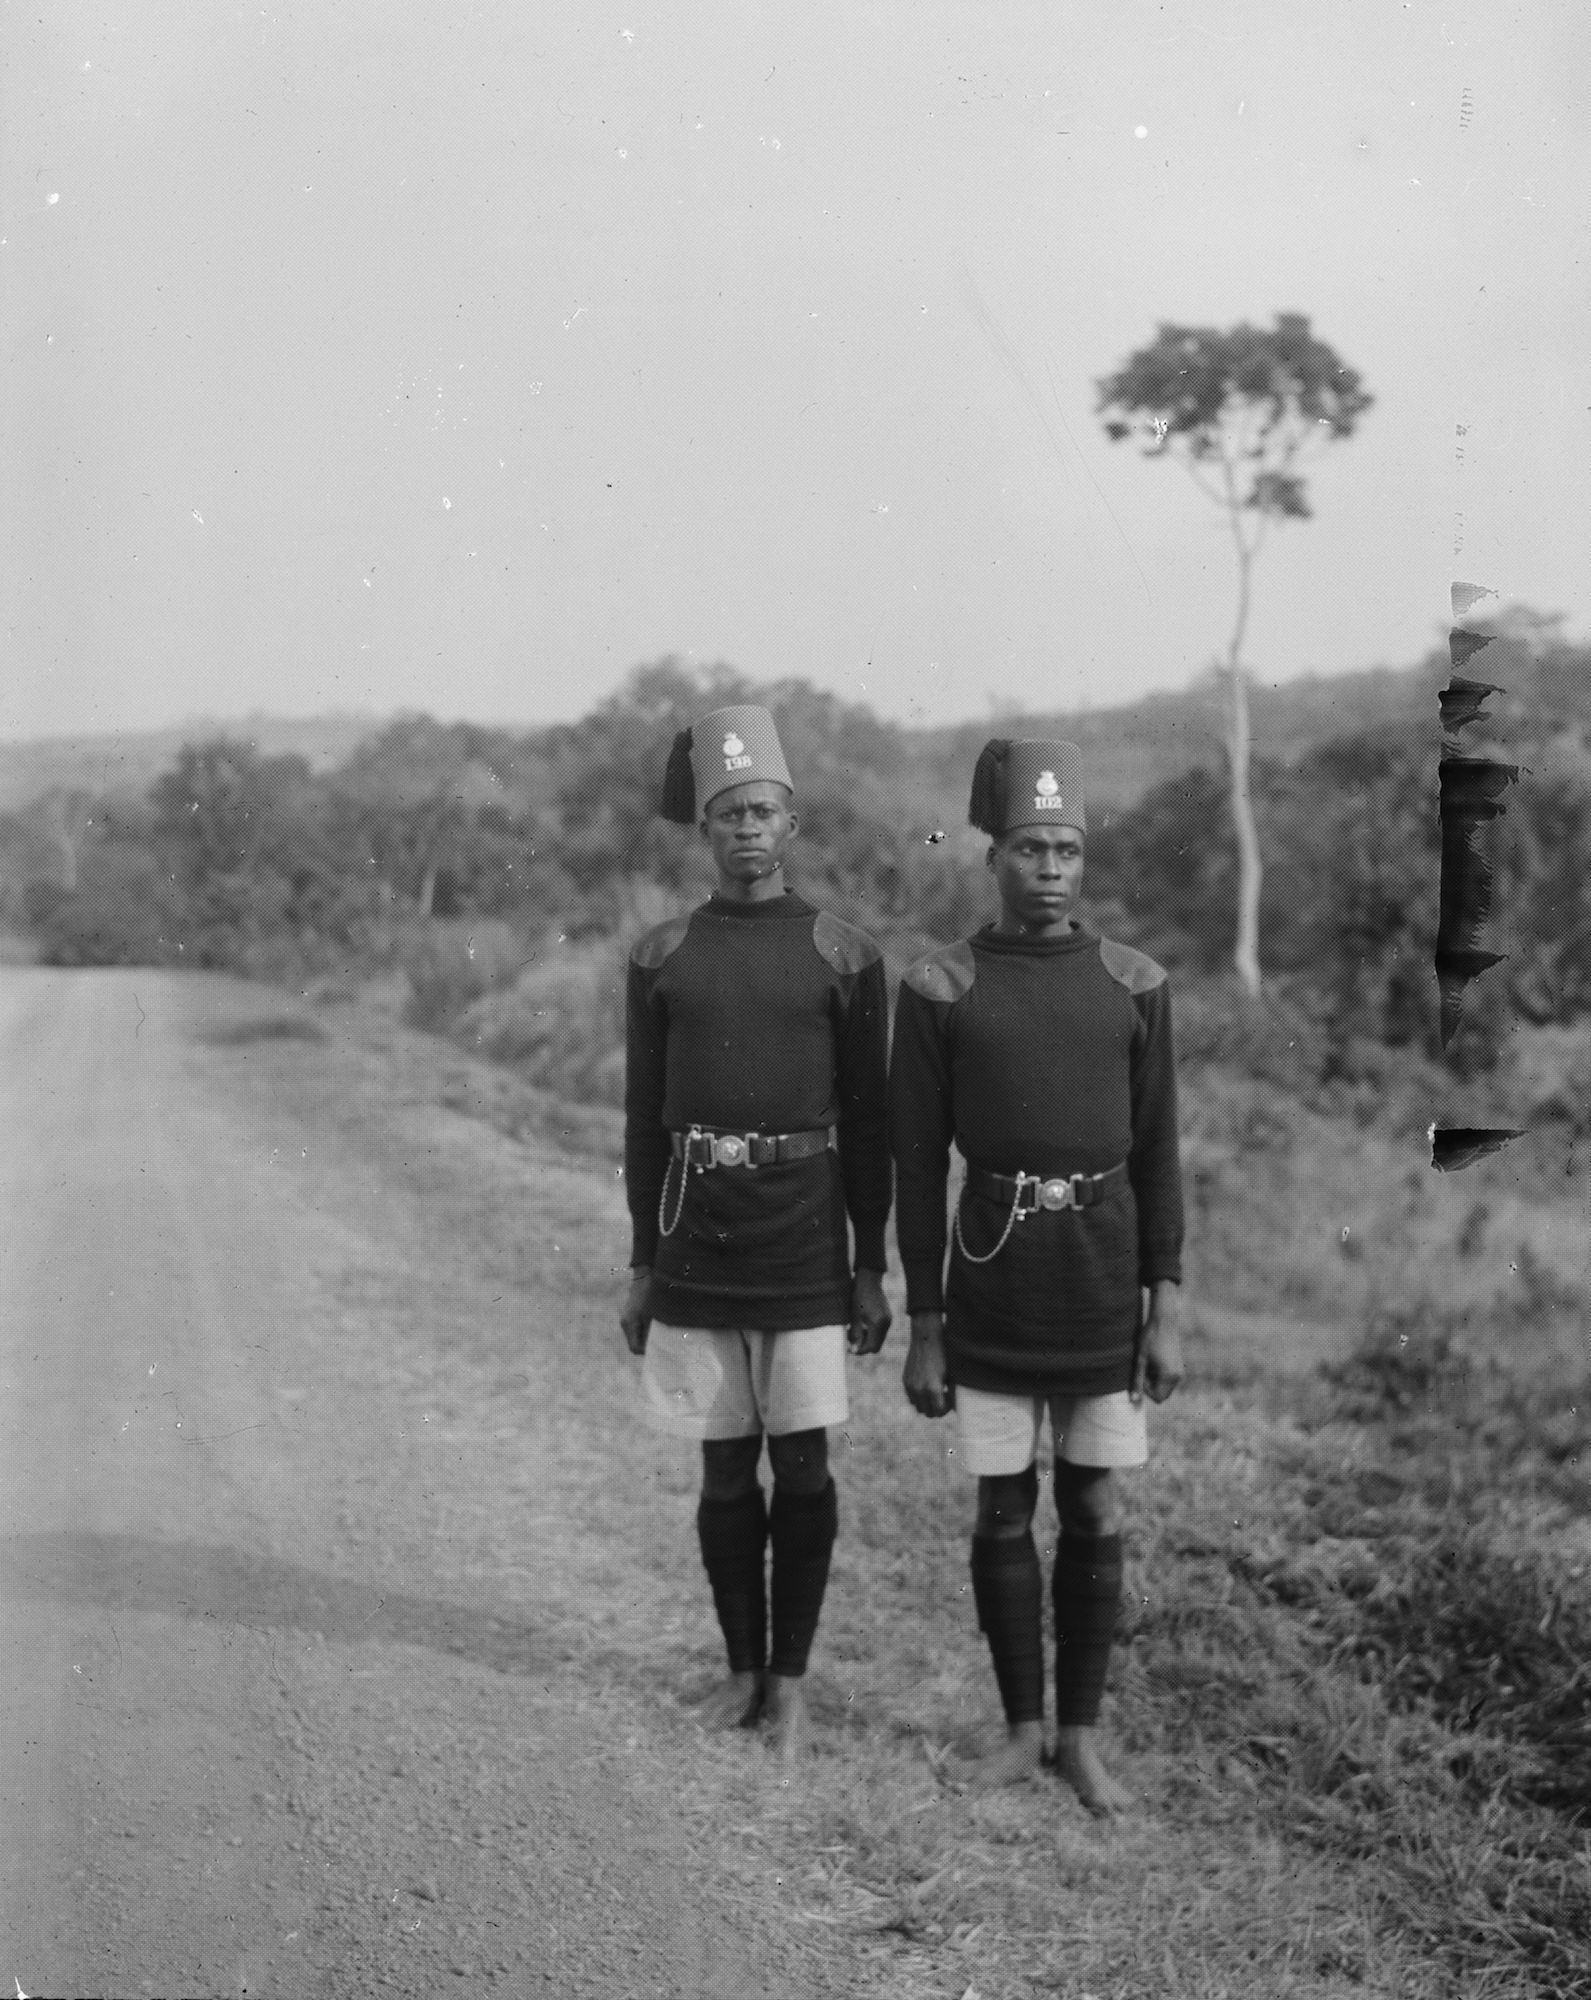 Black and white photo of two soldiers